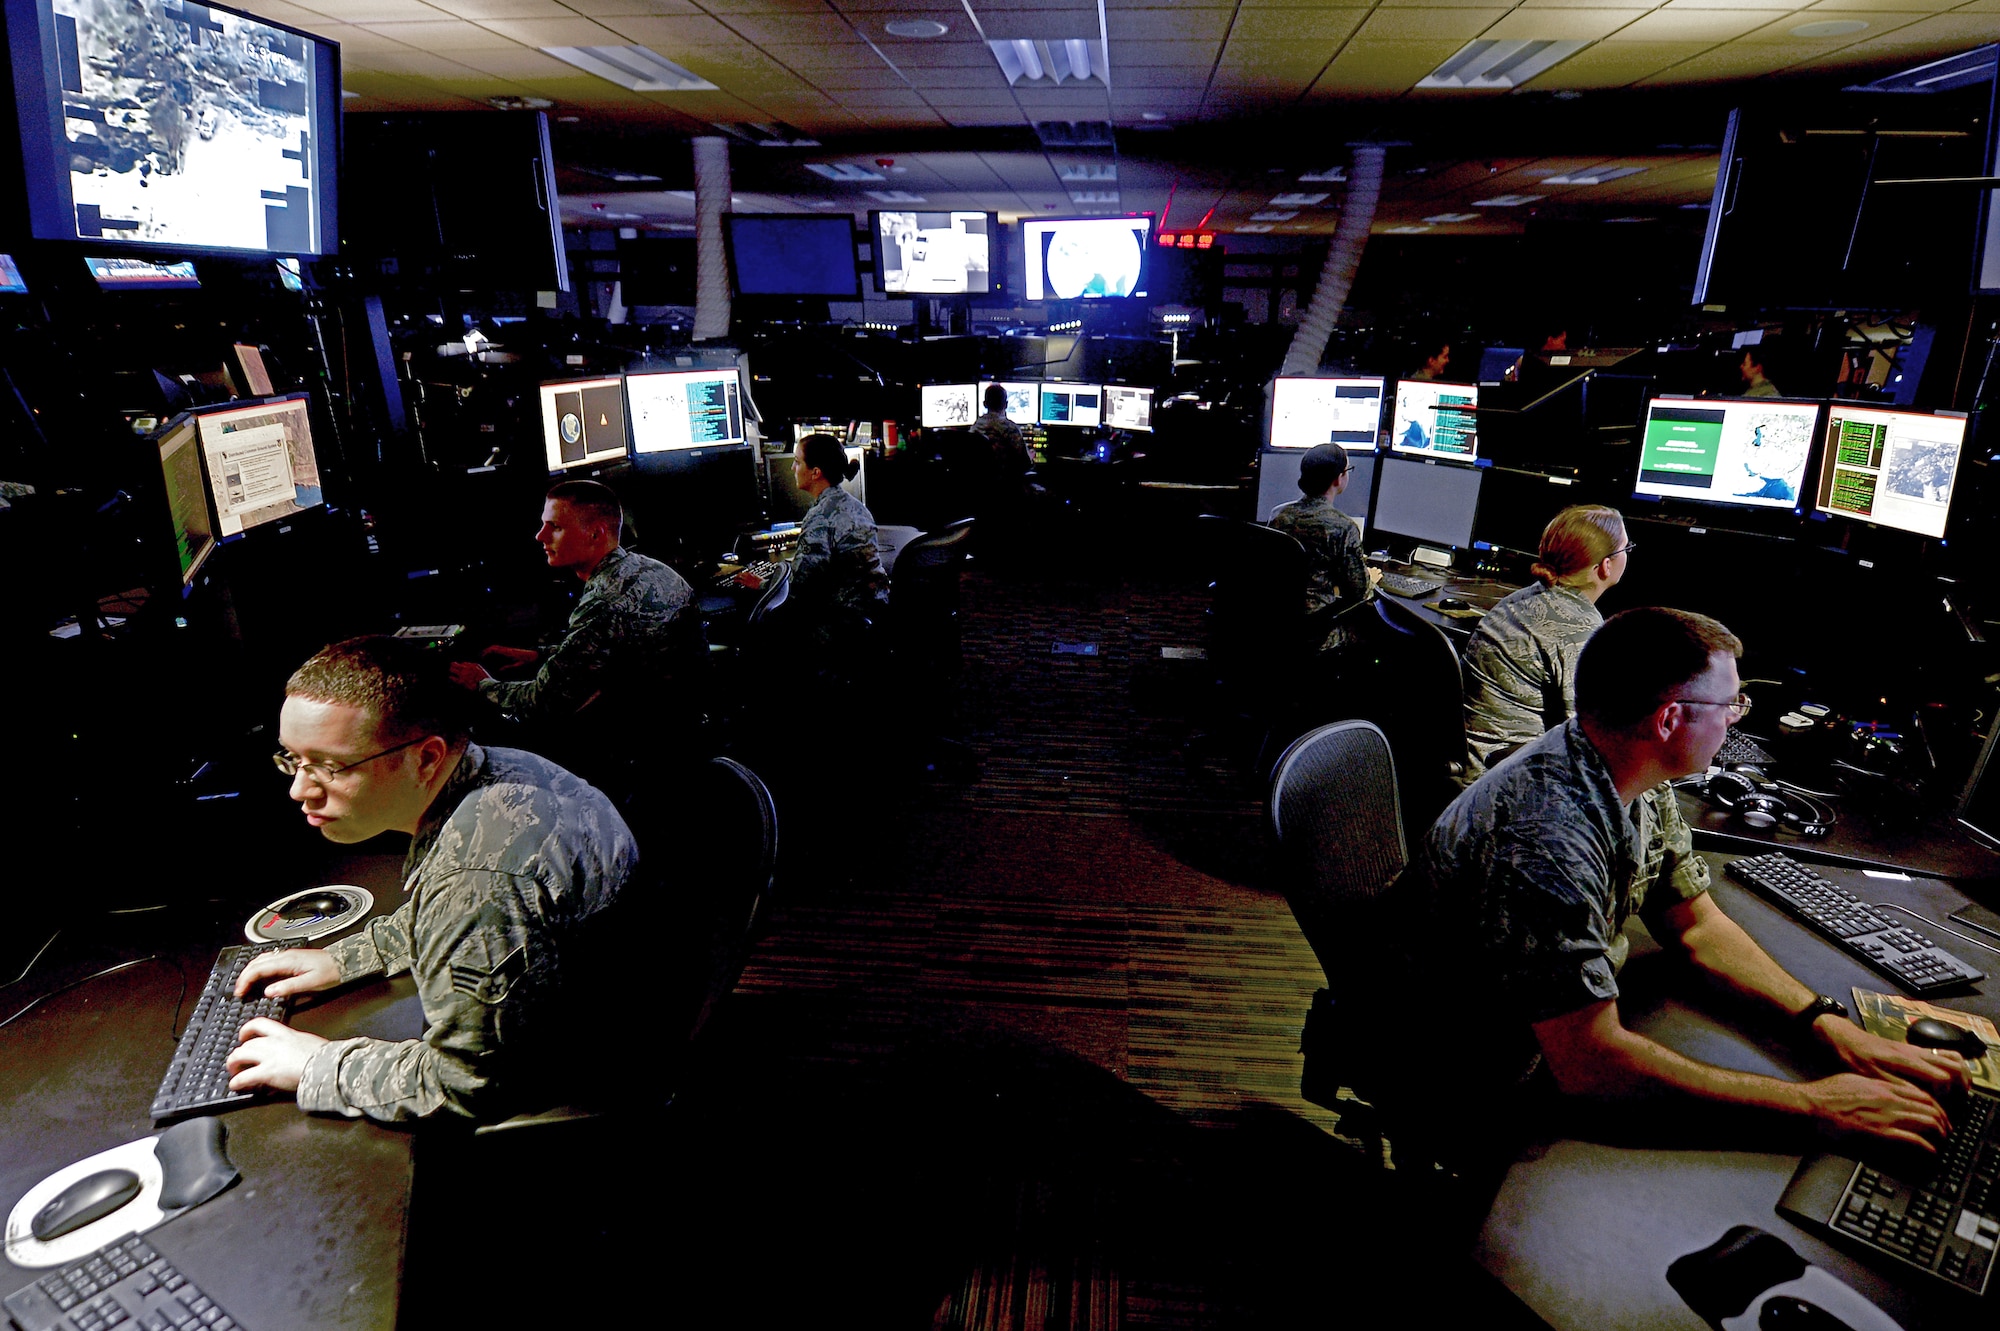 The Air Force Distributed Common Ground System (AF DCGS), also referred to as the AN/GSQ-272 SENTINEL weapon system, is the Air Force’s primary intelligence, surveillance and reconnaissance (ISR) collection, processing, exploitation, analysis and dissemination (CPAD) system. 
(U.S. Air Force photo)